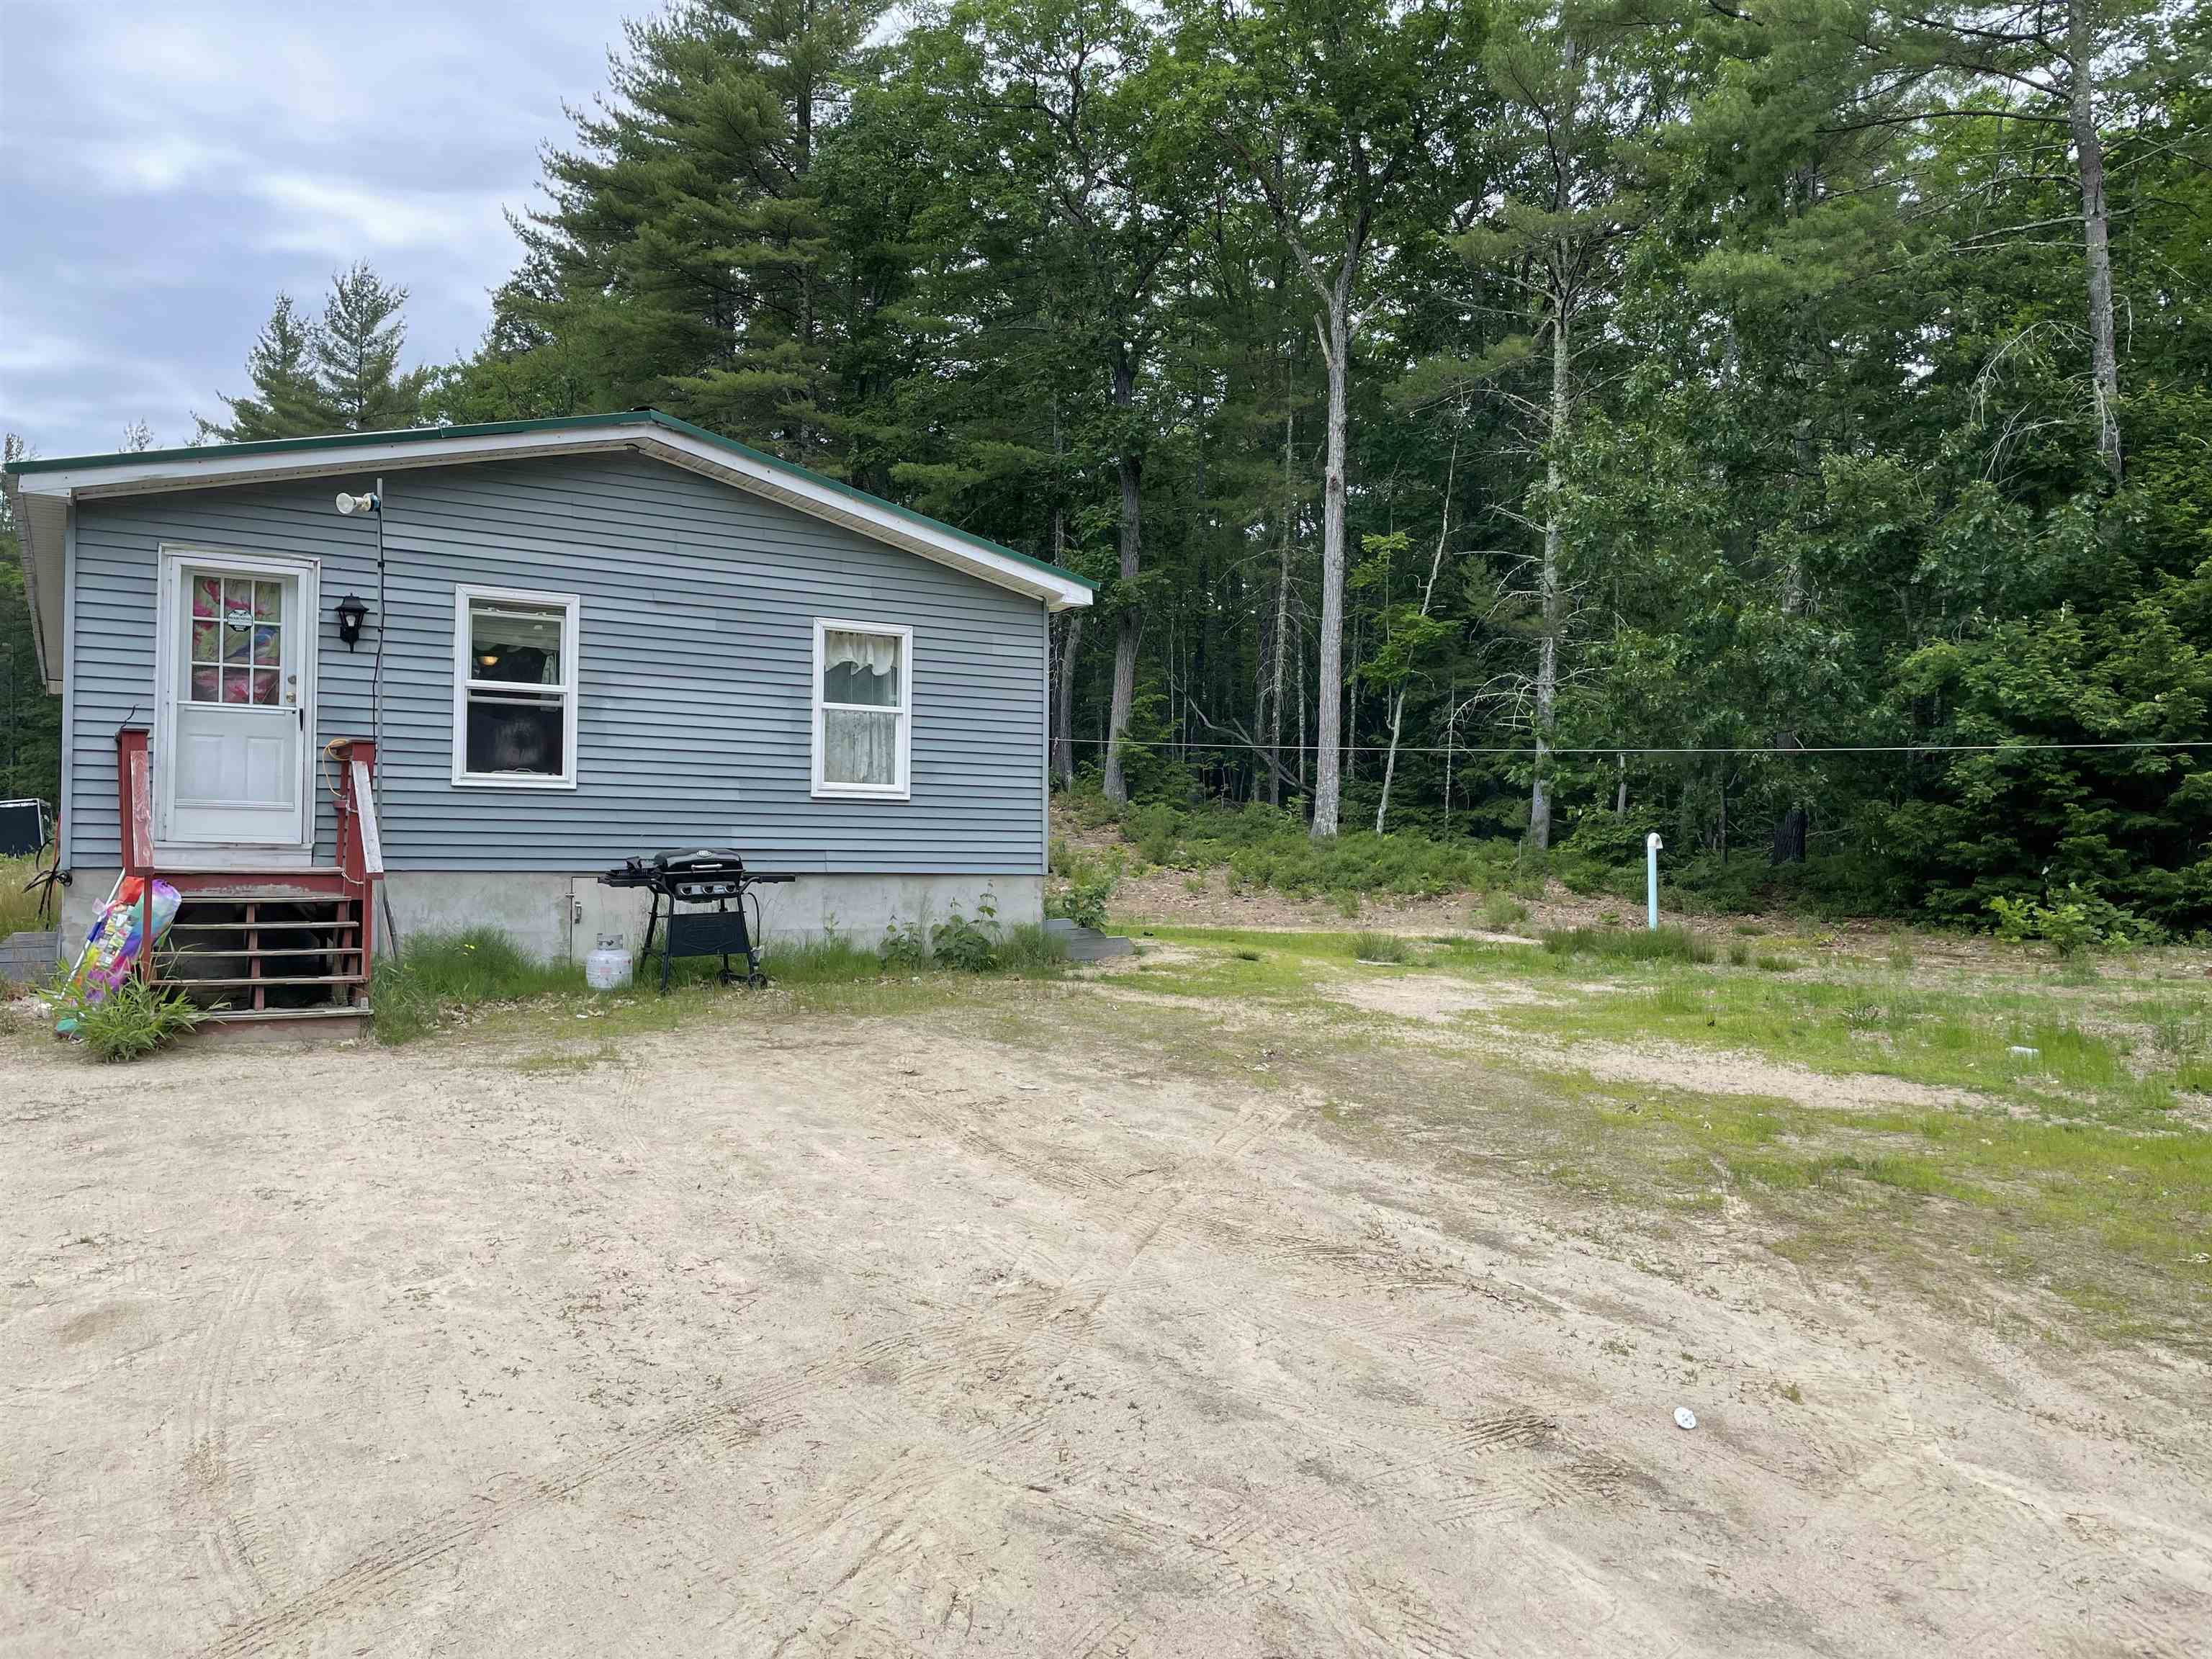 VILLAGE OF CENTER OSSIPEE IN TOWN OF OSSIPEE NH Homes for sale